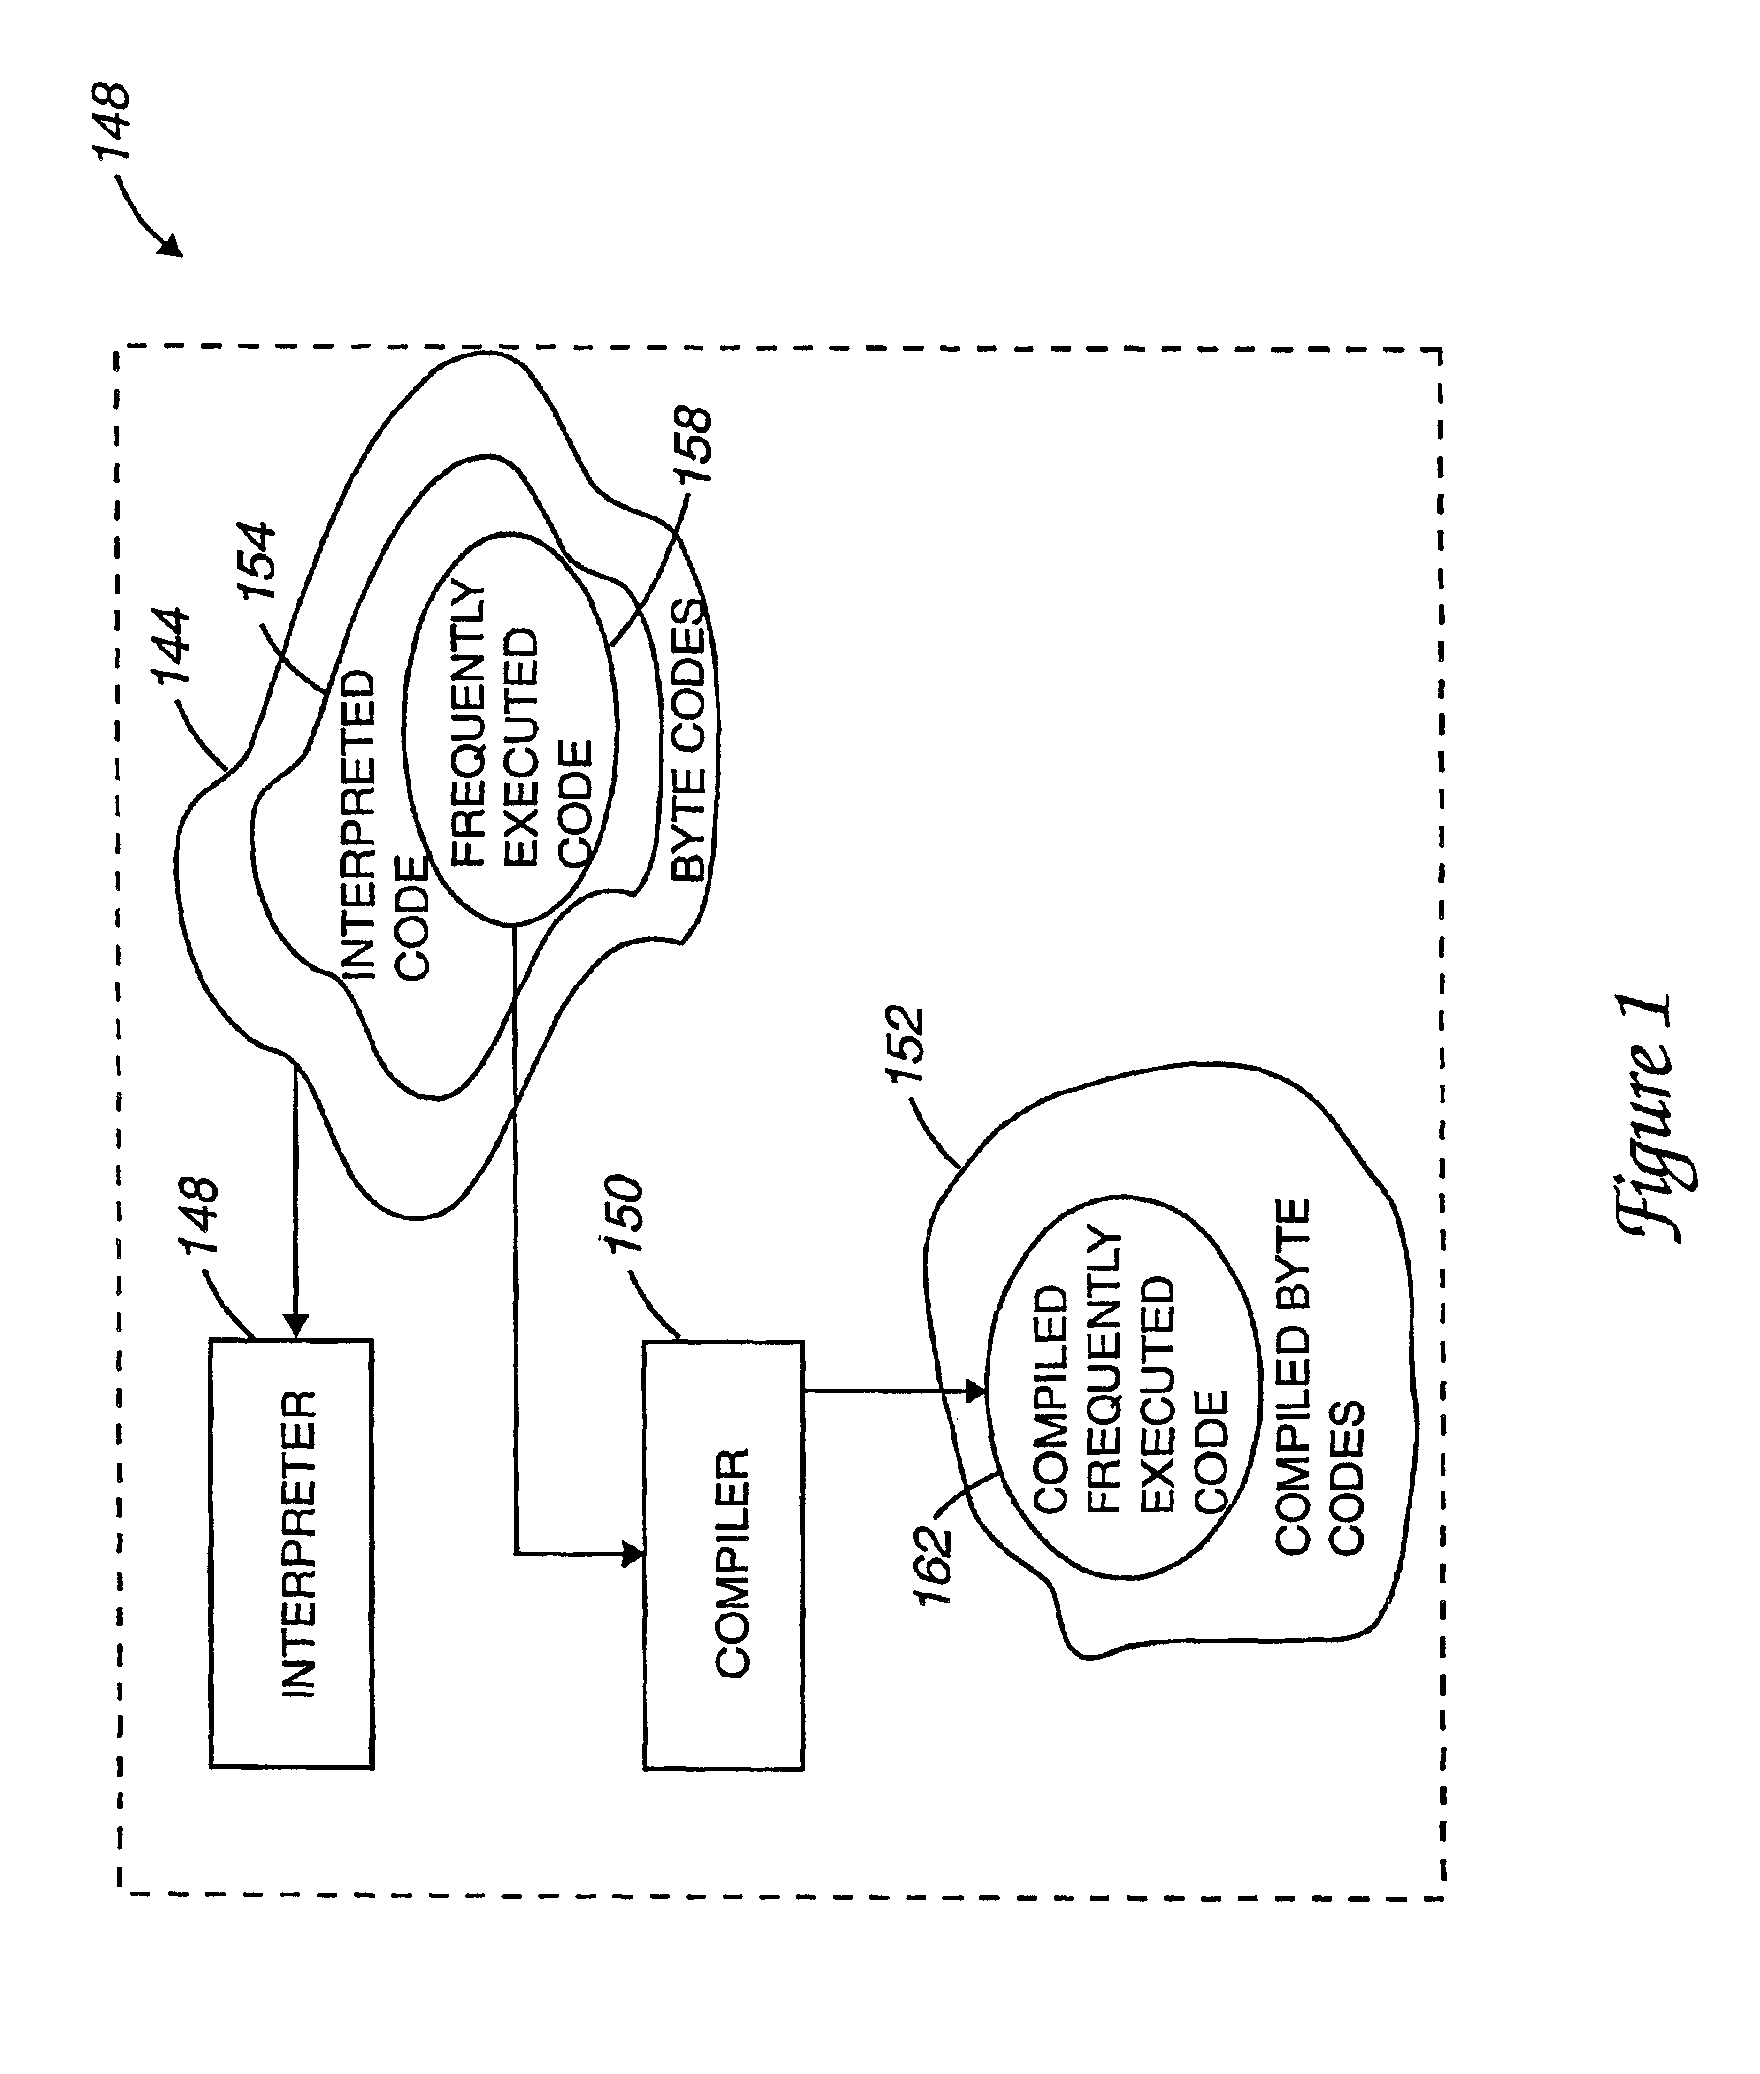 Method and apparatus for performing byte-code optimization during pauses